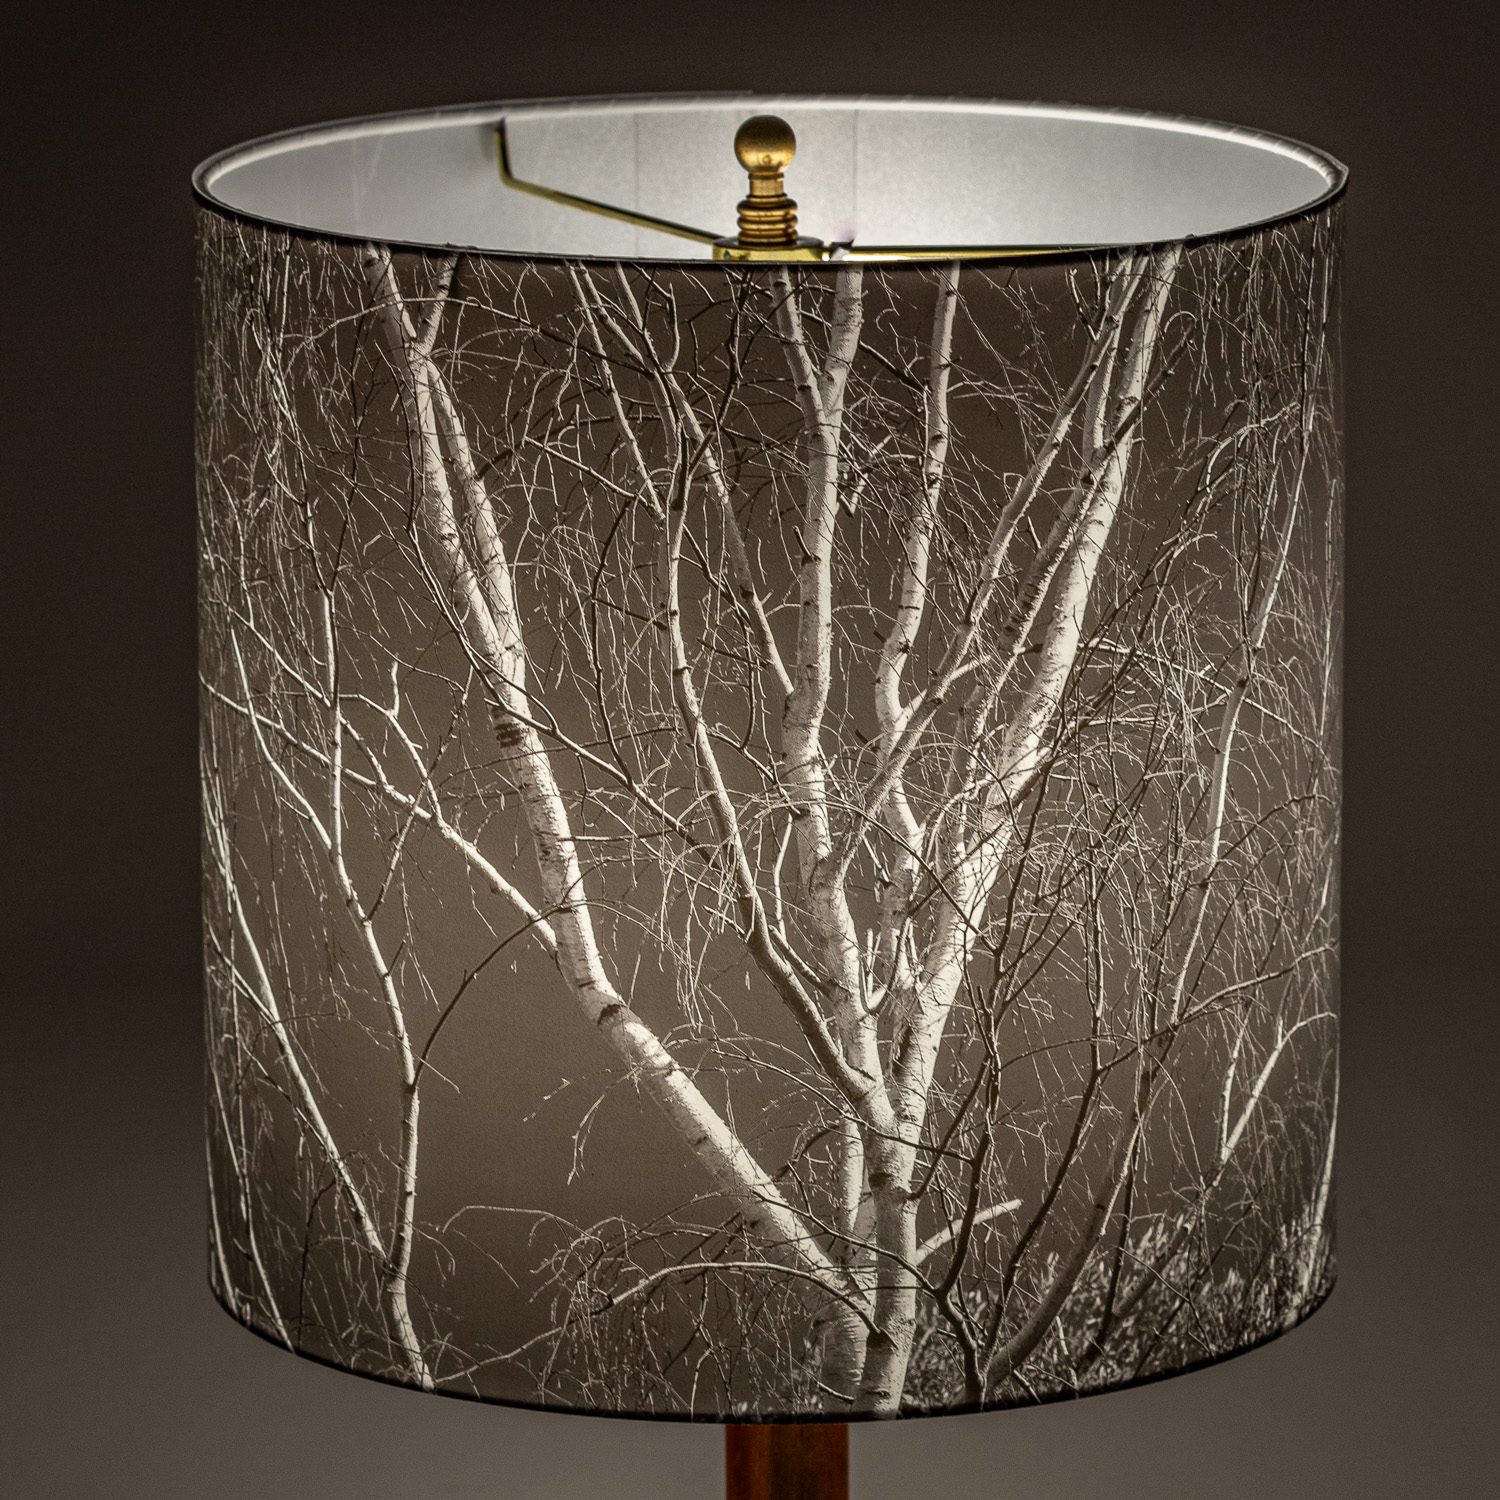 106: Birch tree in winter, black and white -- Photo on Lamp shade by David Elmore